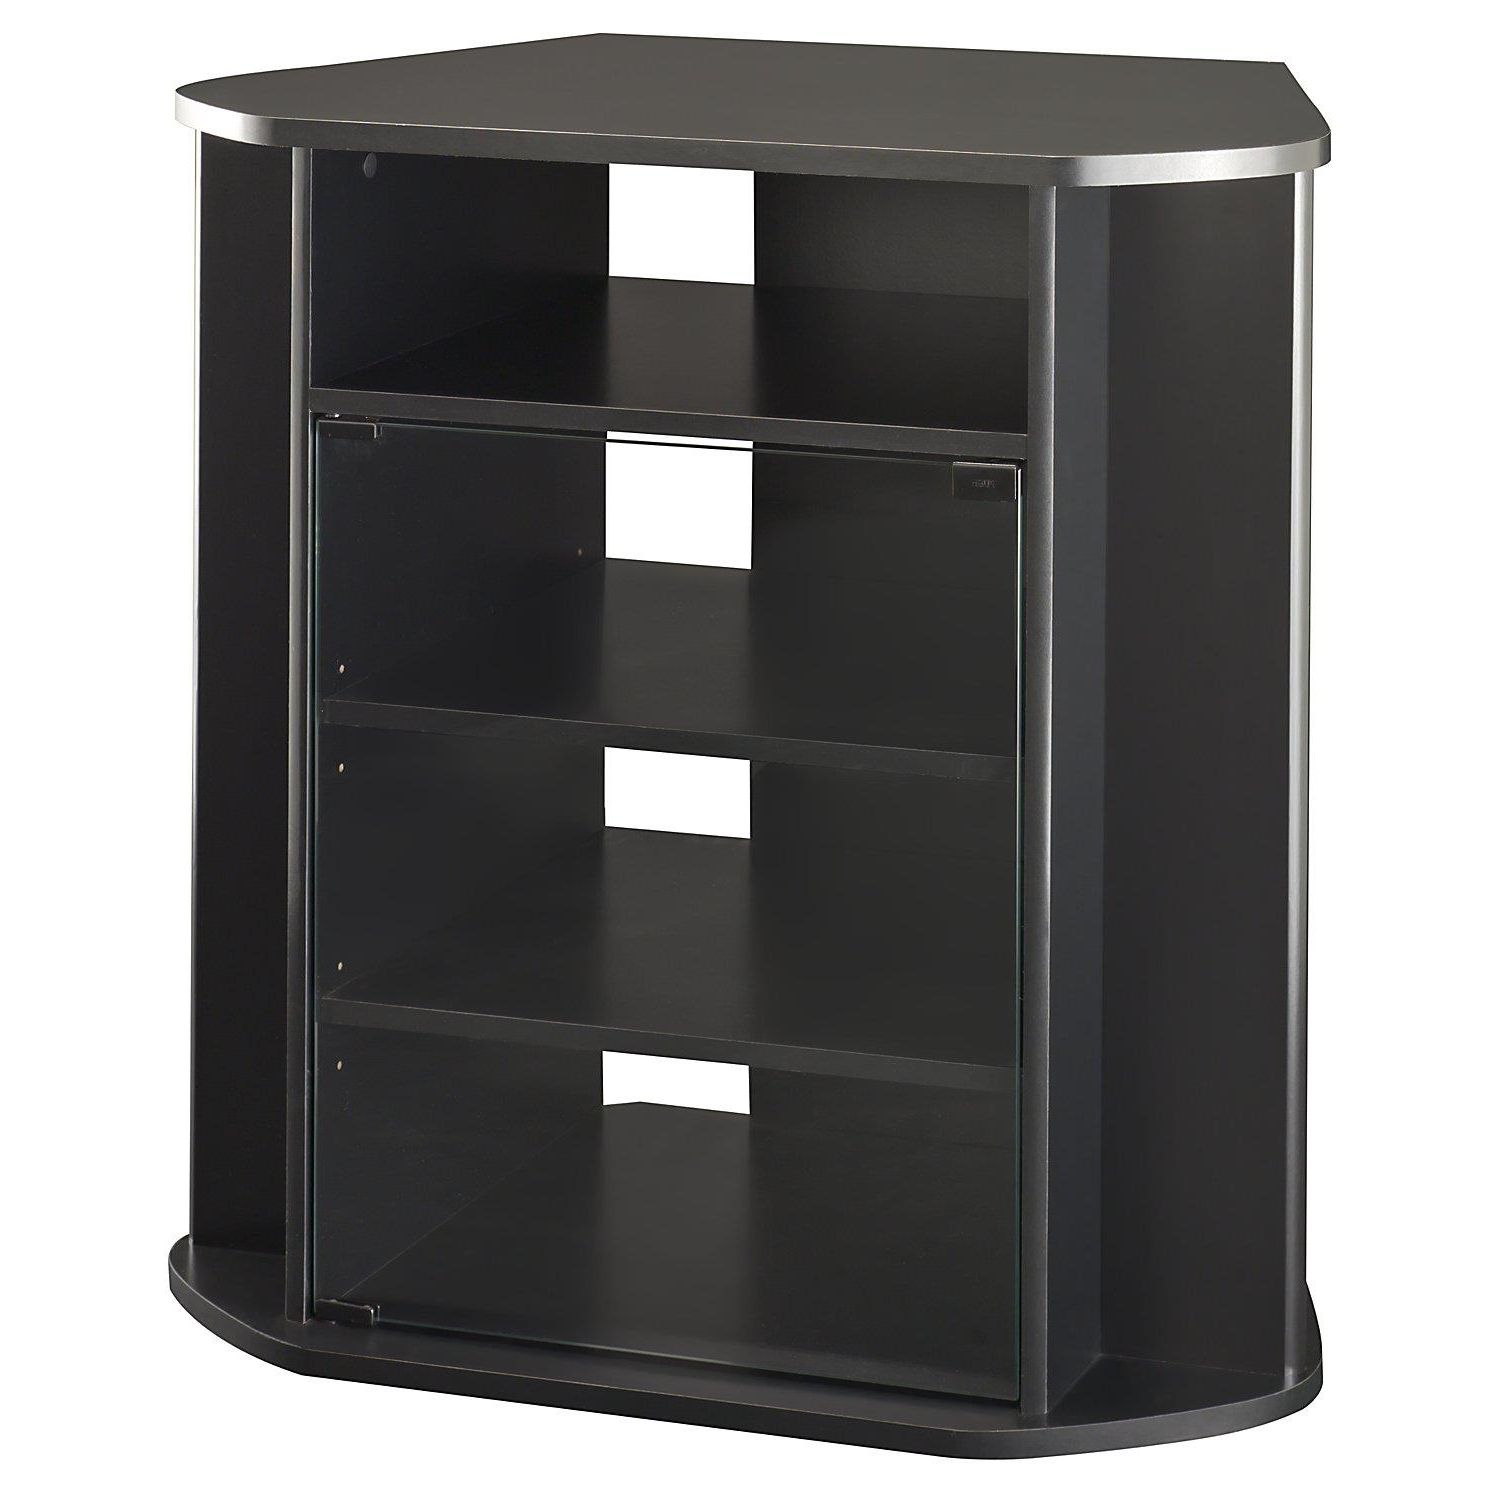 Tall Black Corner Tv Cabinet With Glass Doors And Four Shelves Of For Latest Corner Tv Cabinets With Glass Doors (Photo 14 of 20)